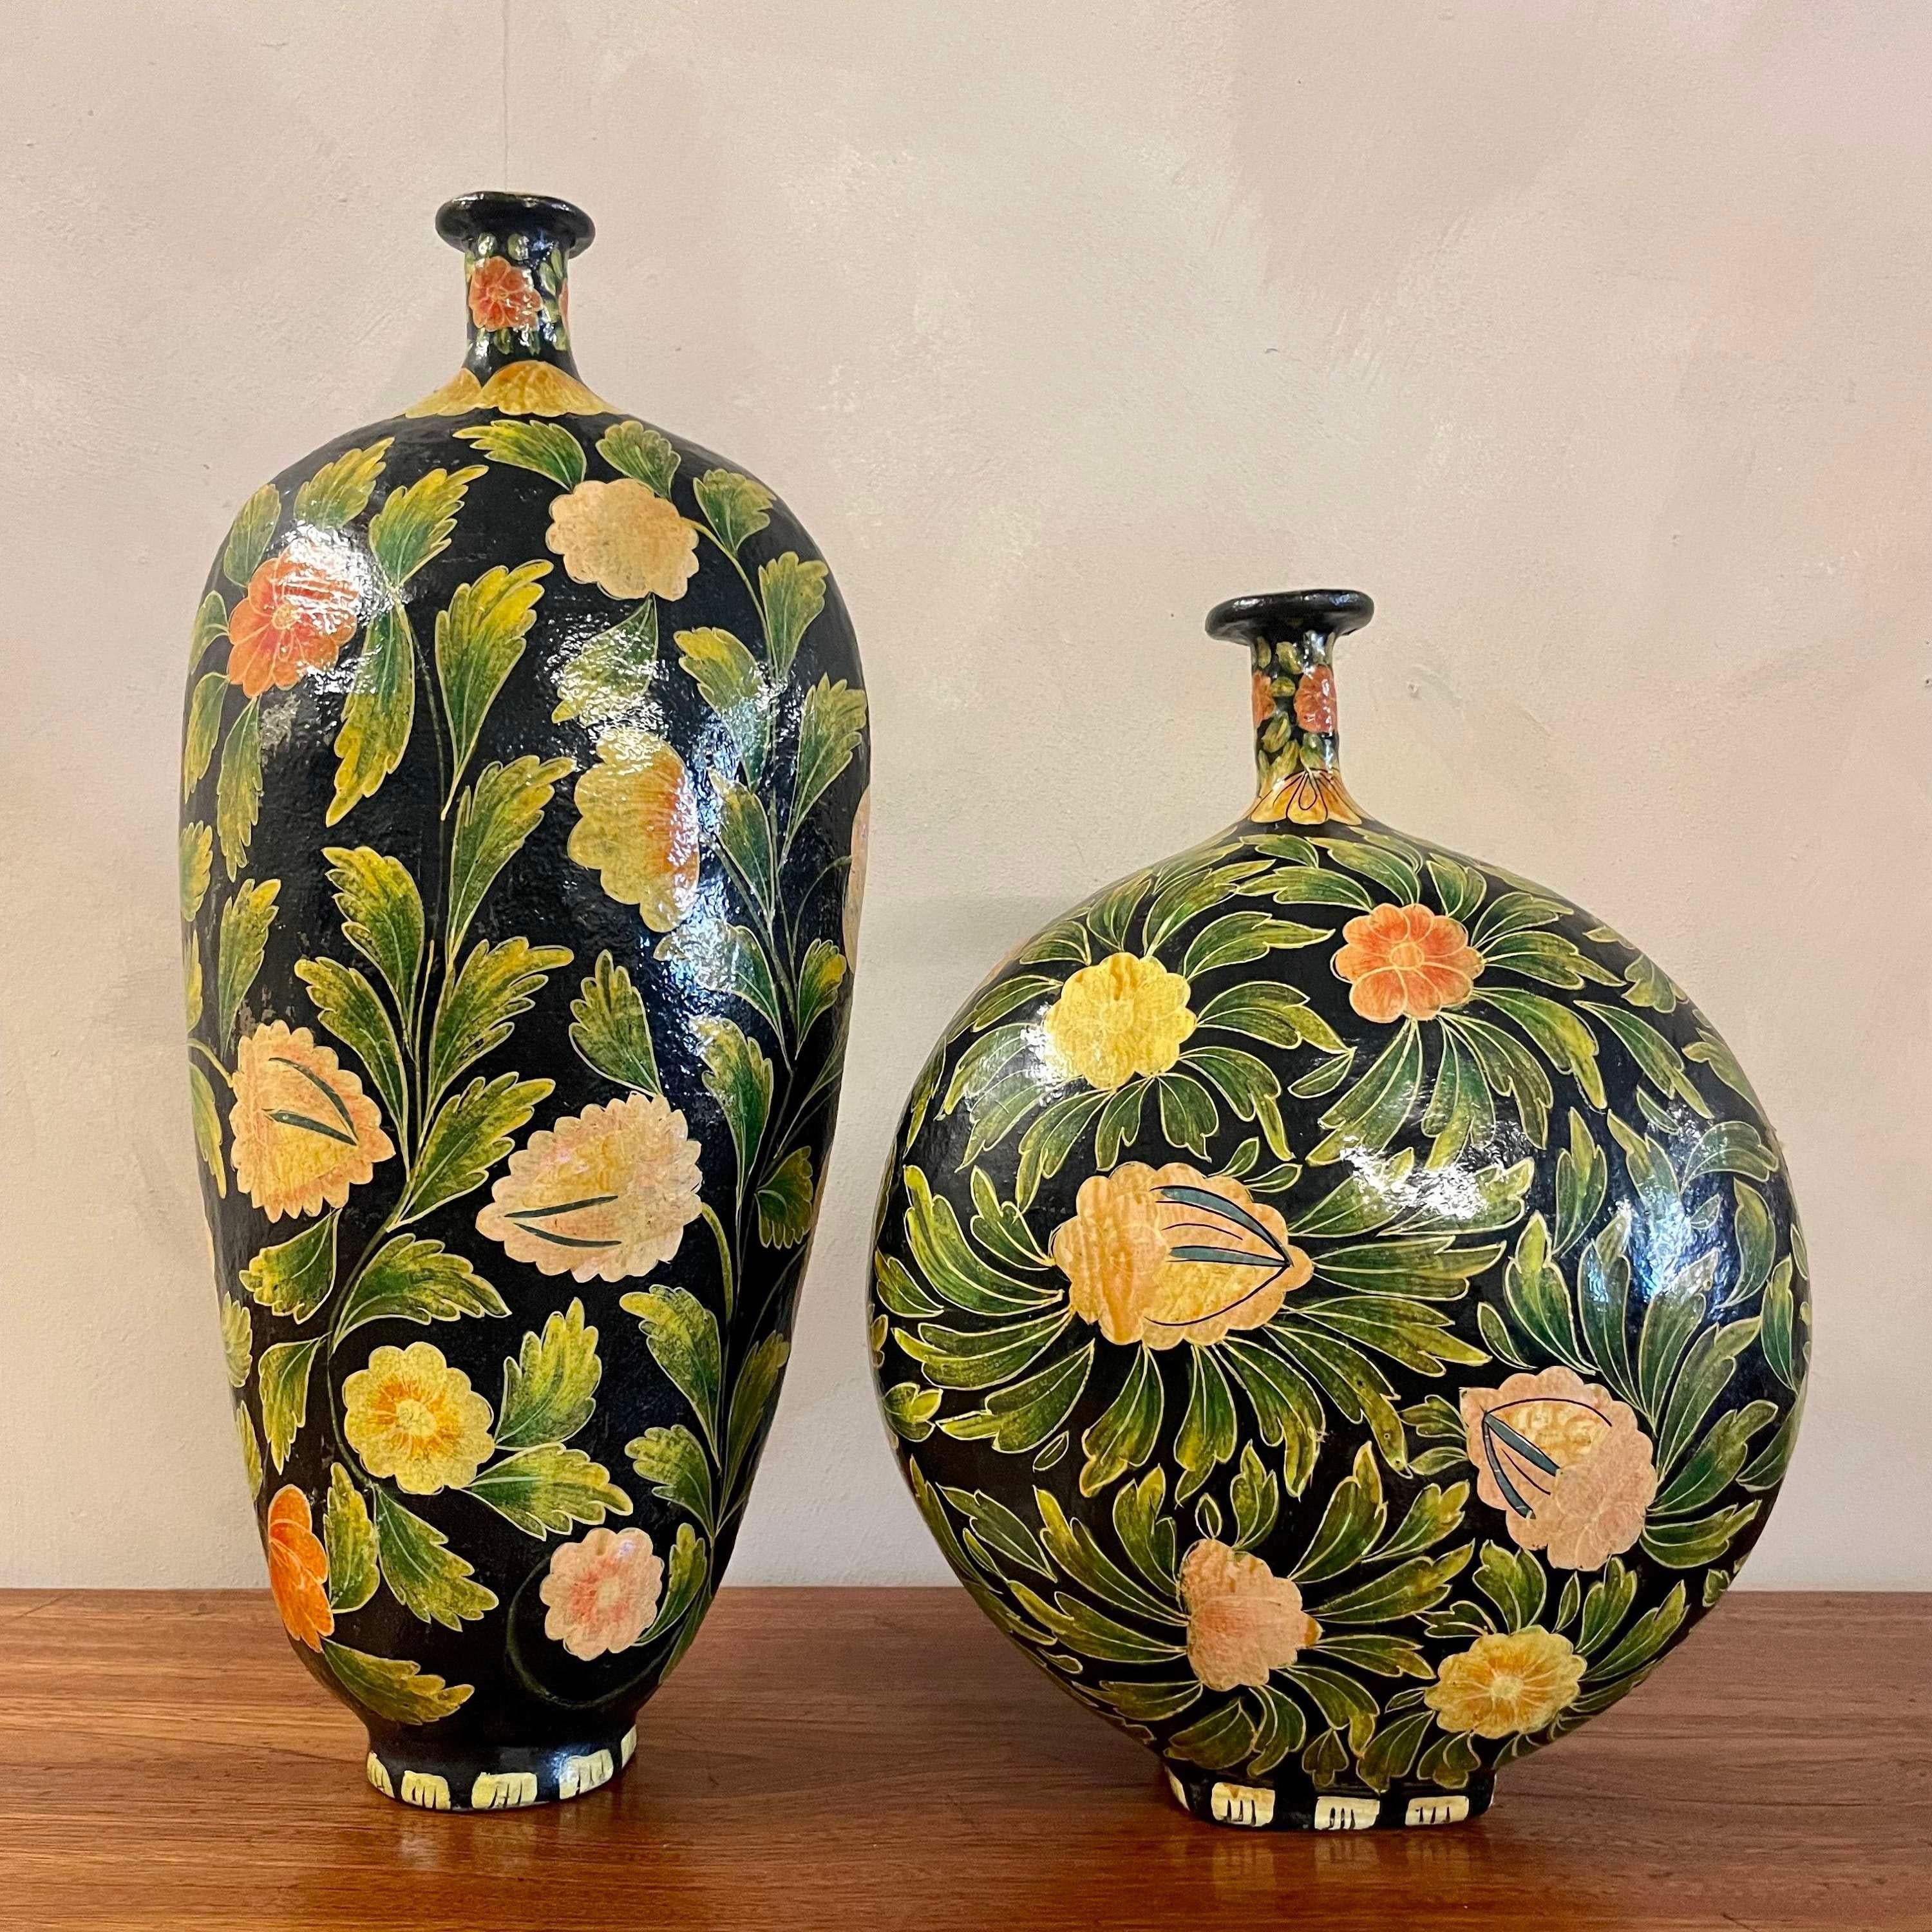 Pair of large Kashmiri hand painted floral paper mache and velum vases.
Hand painted, Early 20th Century.
These vases would have been re painted over time, due to weather conditions in India affecting the colourtion of the pieces on the markets